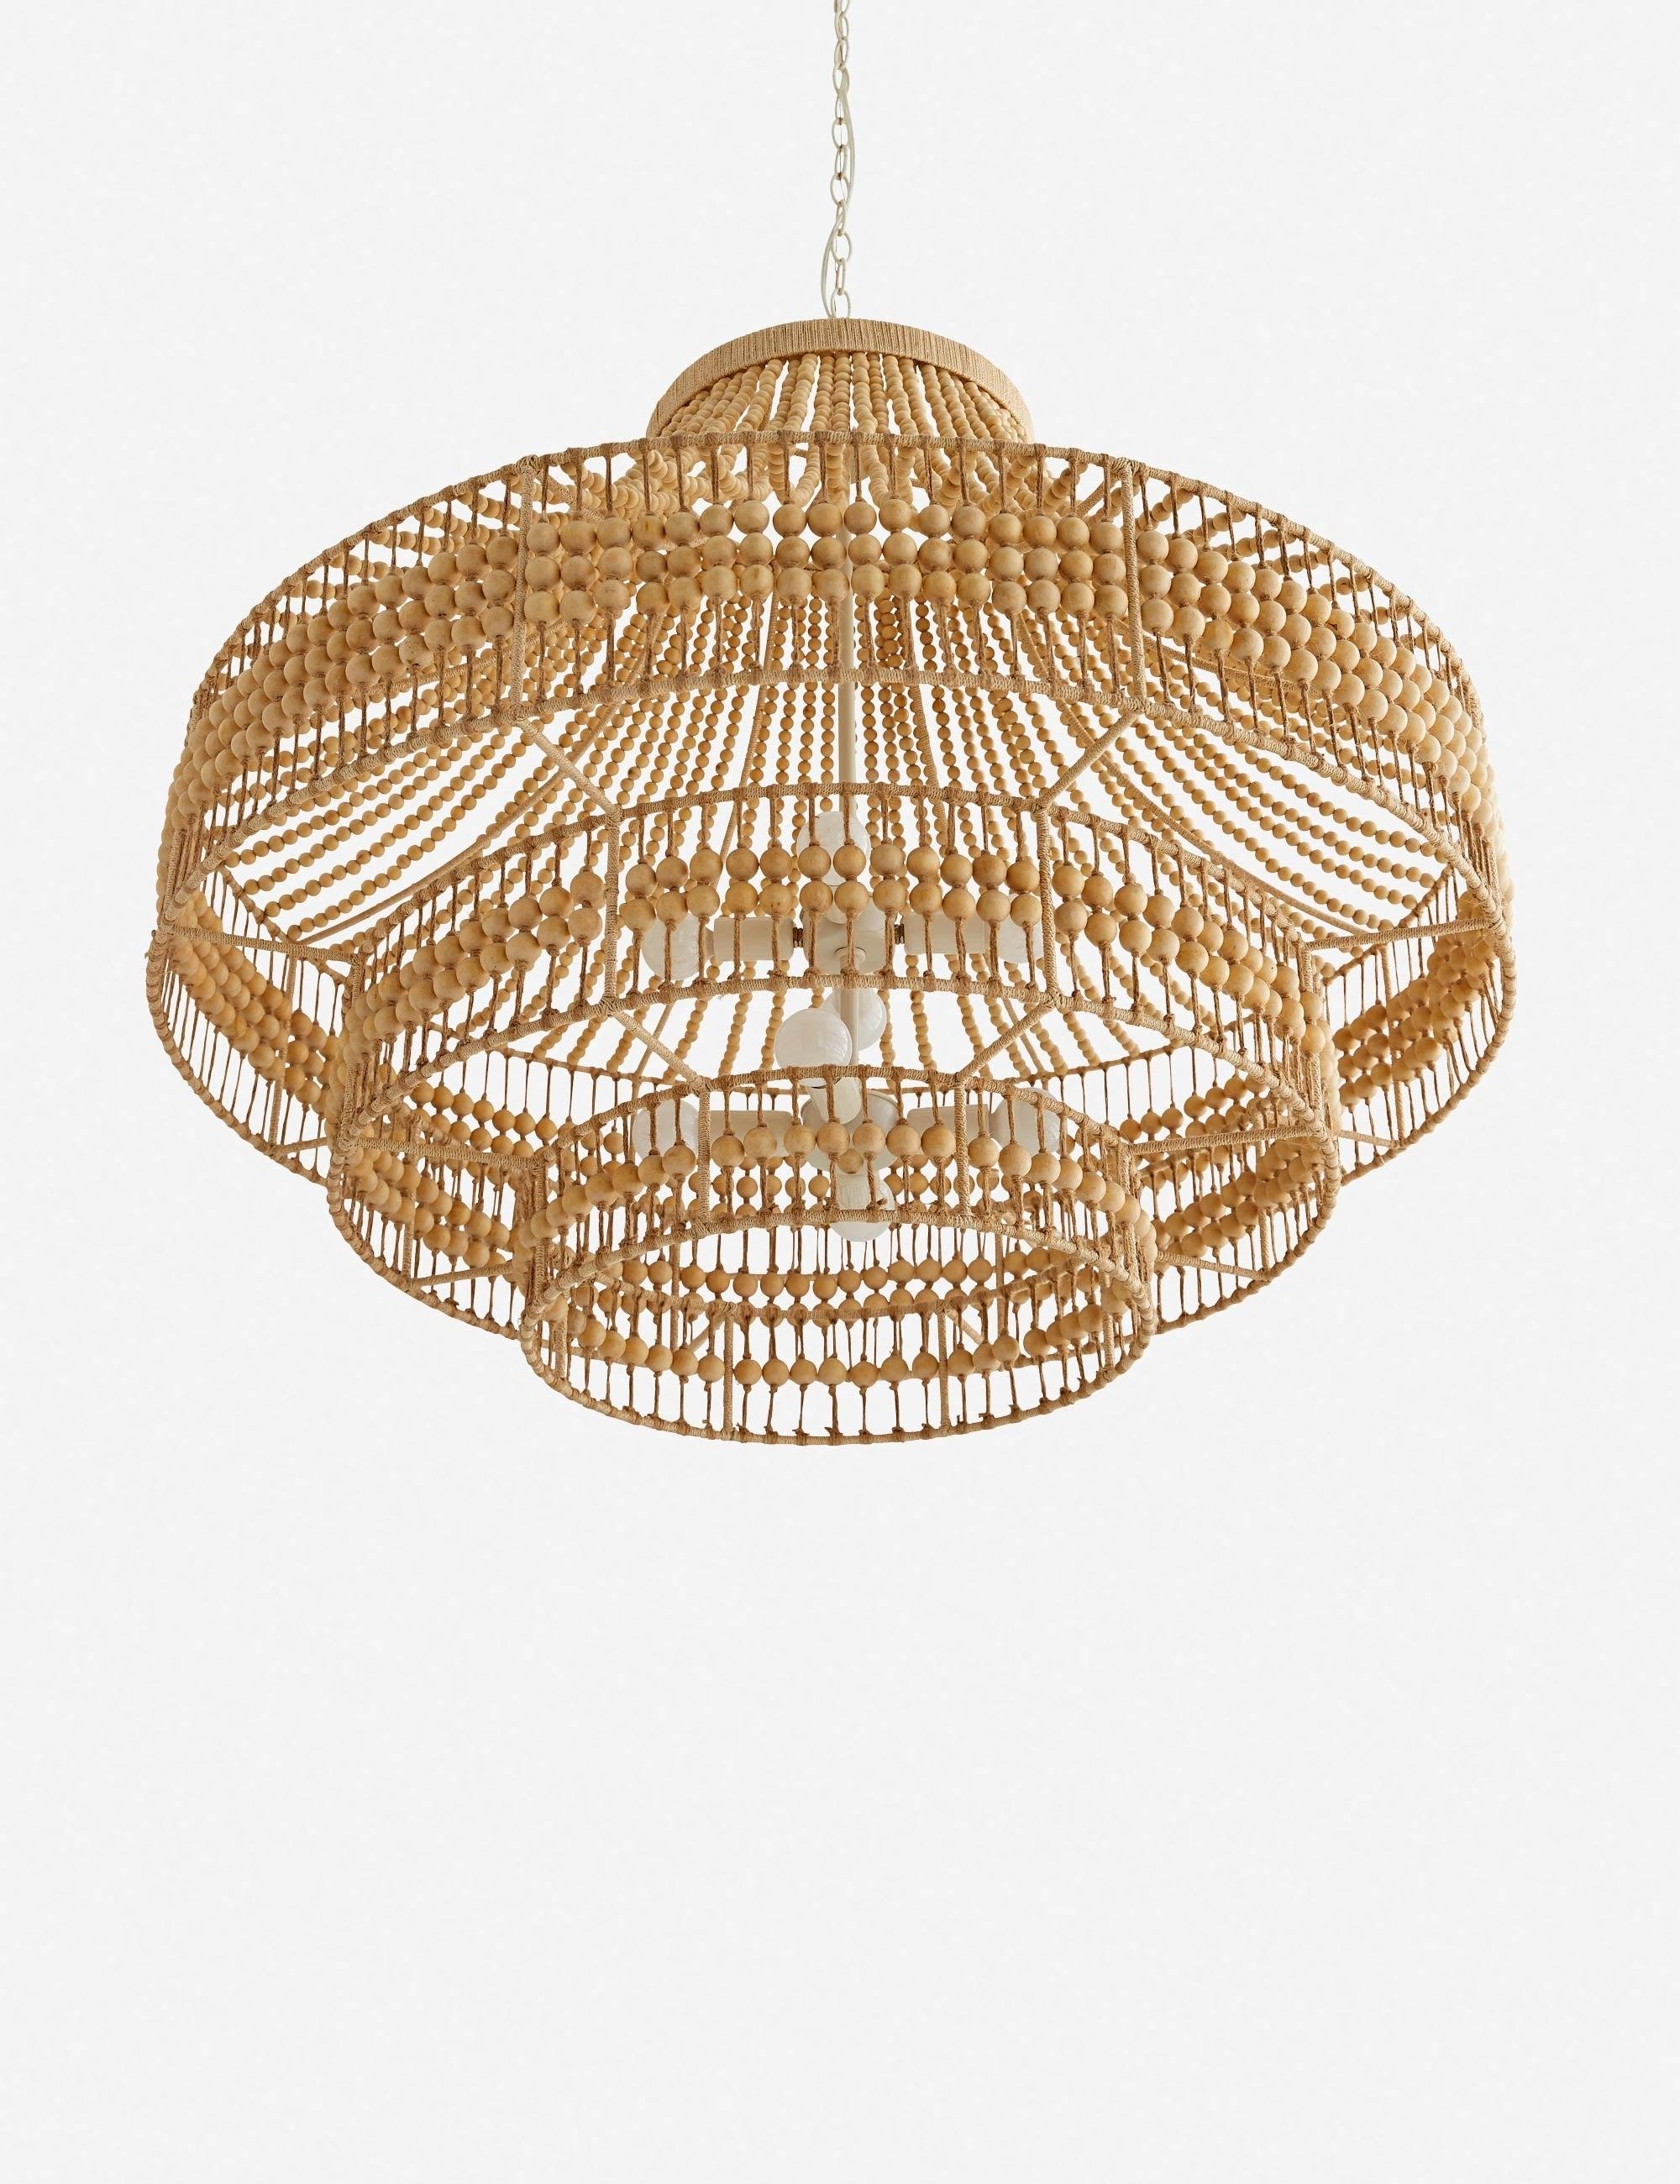 Tulane Empire 31" Natural Wood and Abaca Beaded Chandelier